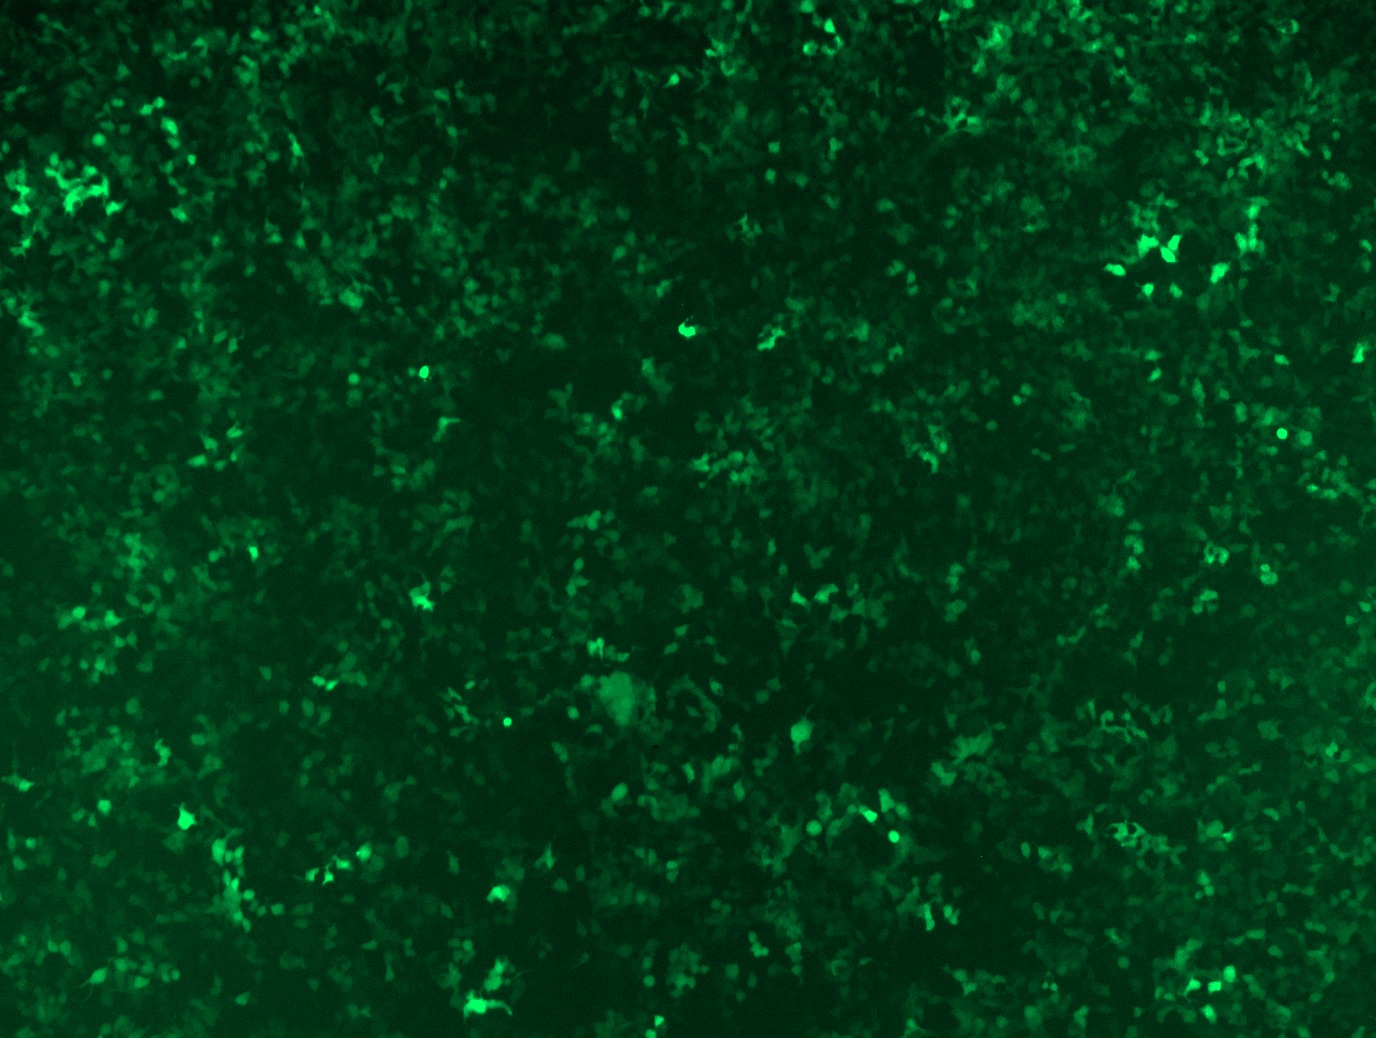 GFP signal was observed under microscope at 48 hours after transduction of TL315696A virus into HEK293 cells. TL315696A virus was prepared using lenti-shRNA TL315696A and TR30037 packaging kit.